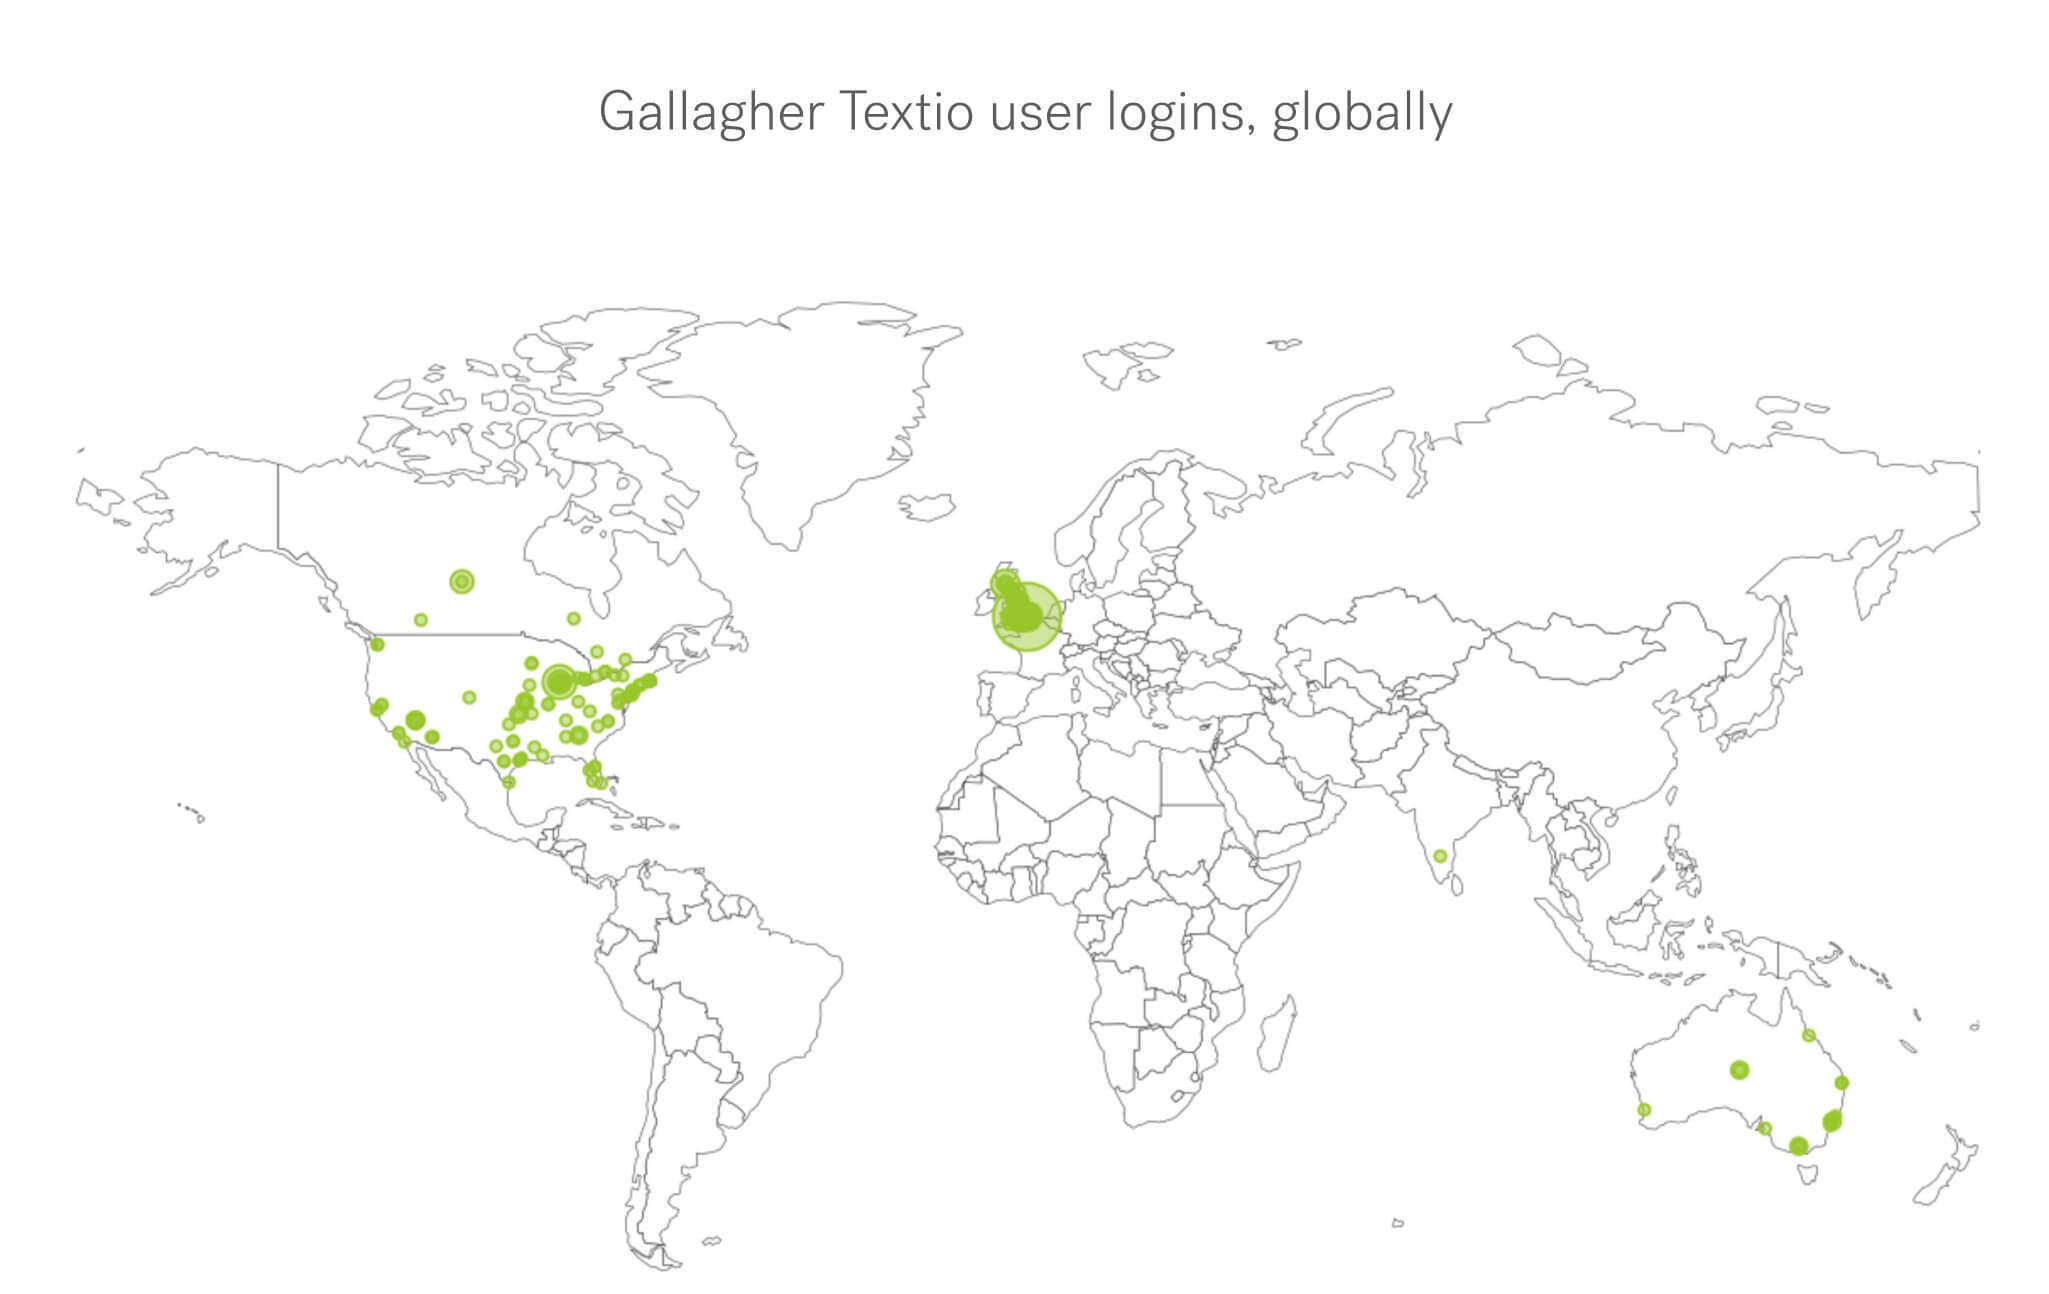 Global map image labeled "Gallagher Textio user logins, globally" with highlighted areas the US, Canada, UK, Australia and India